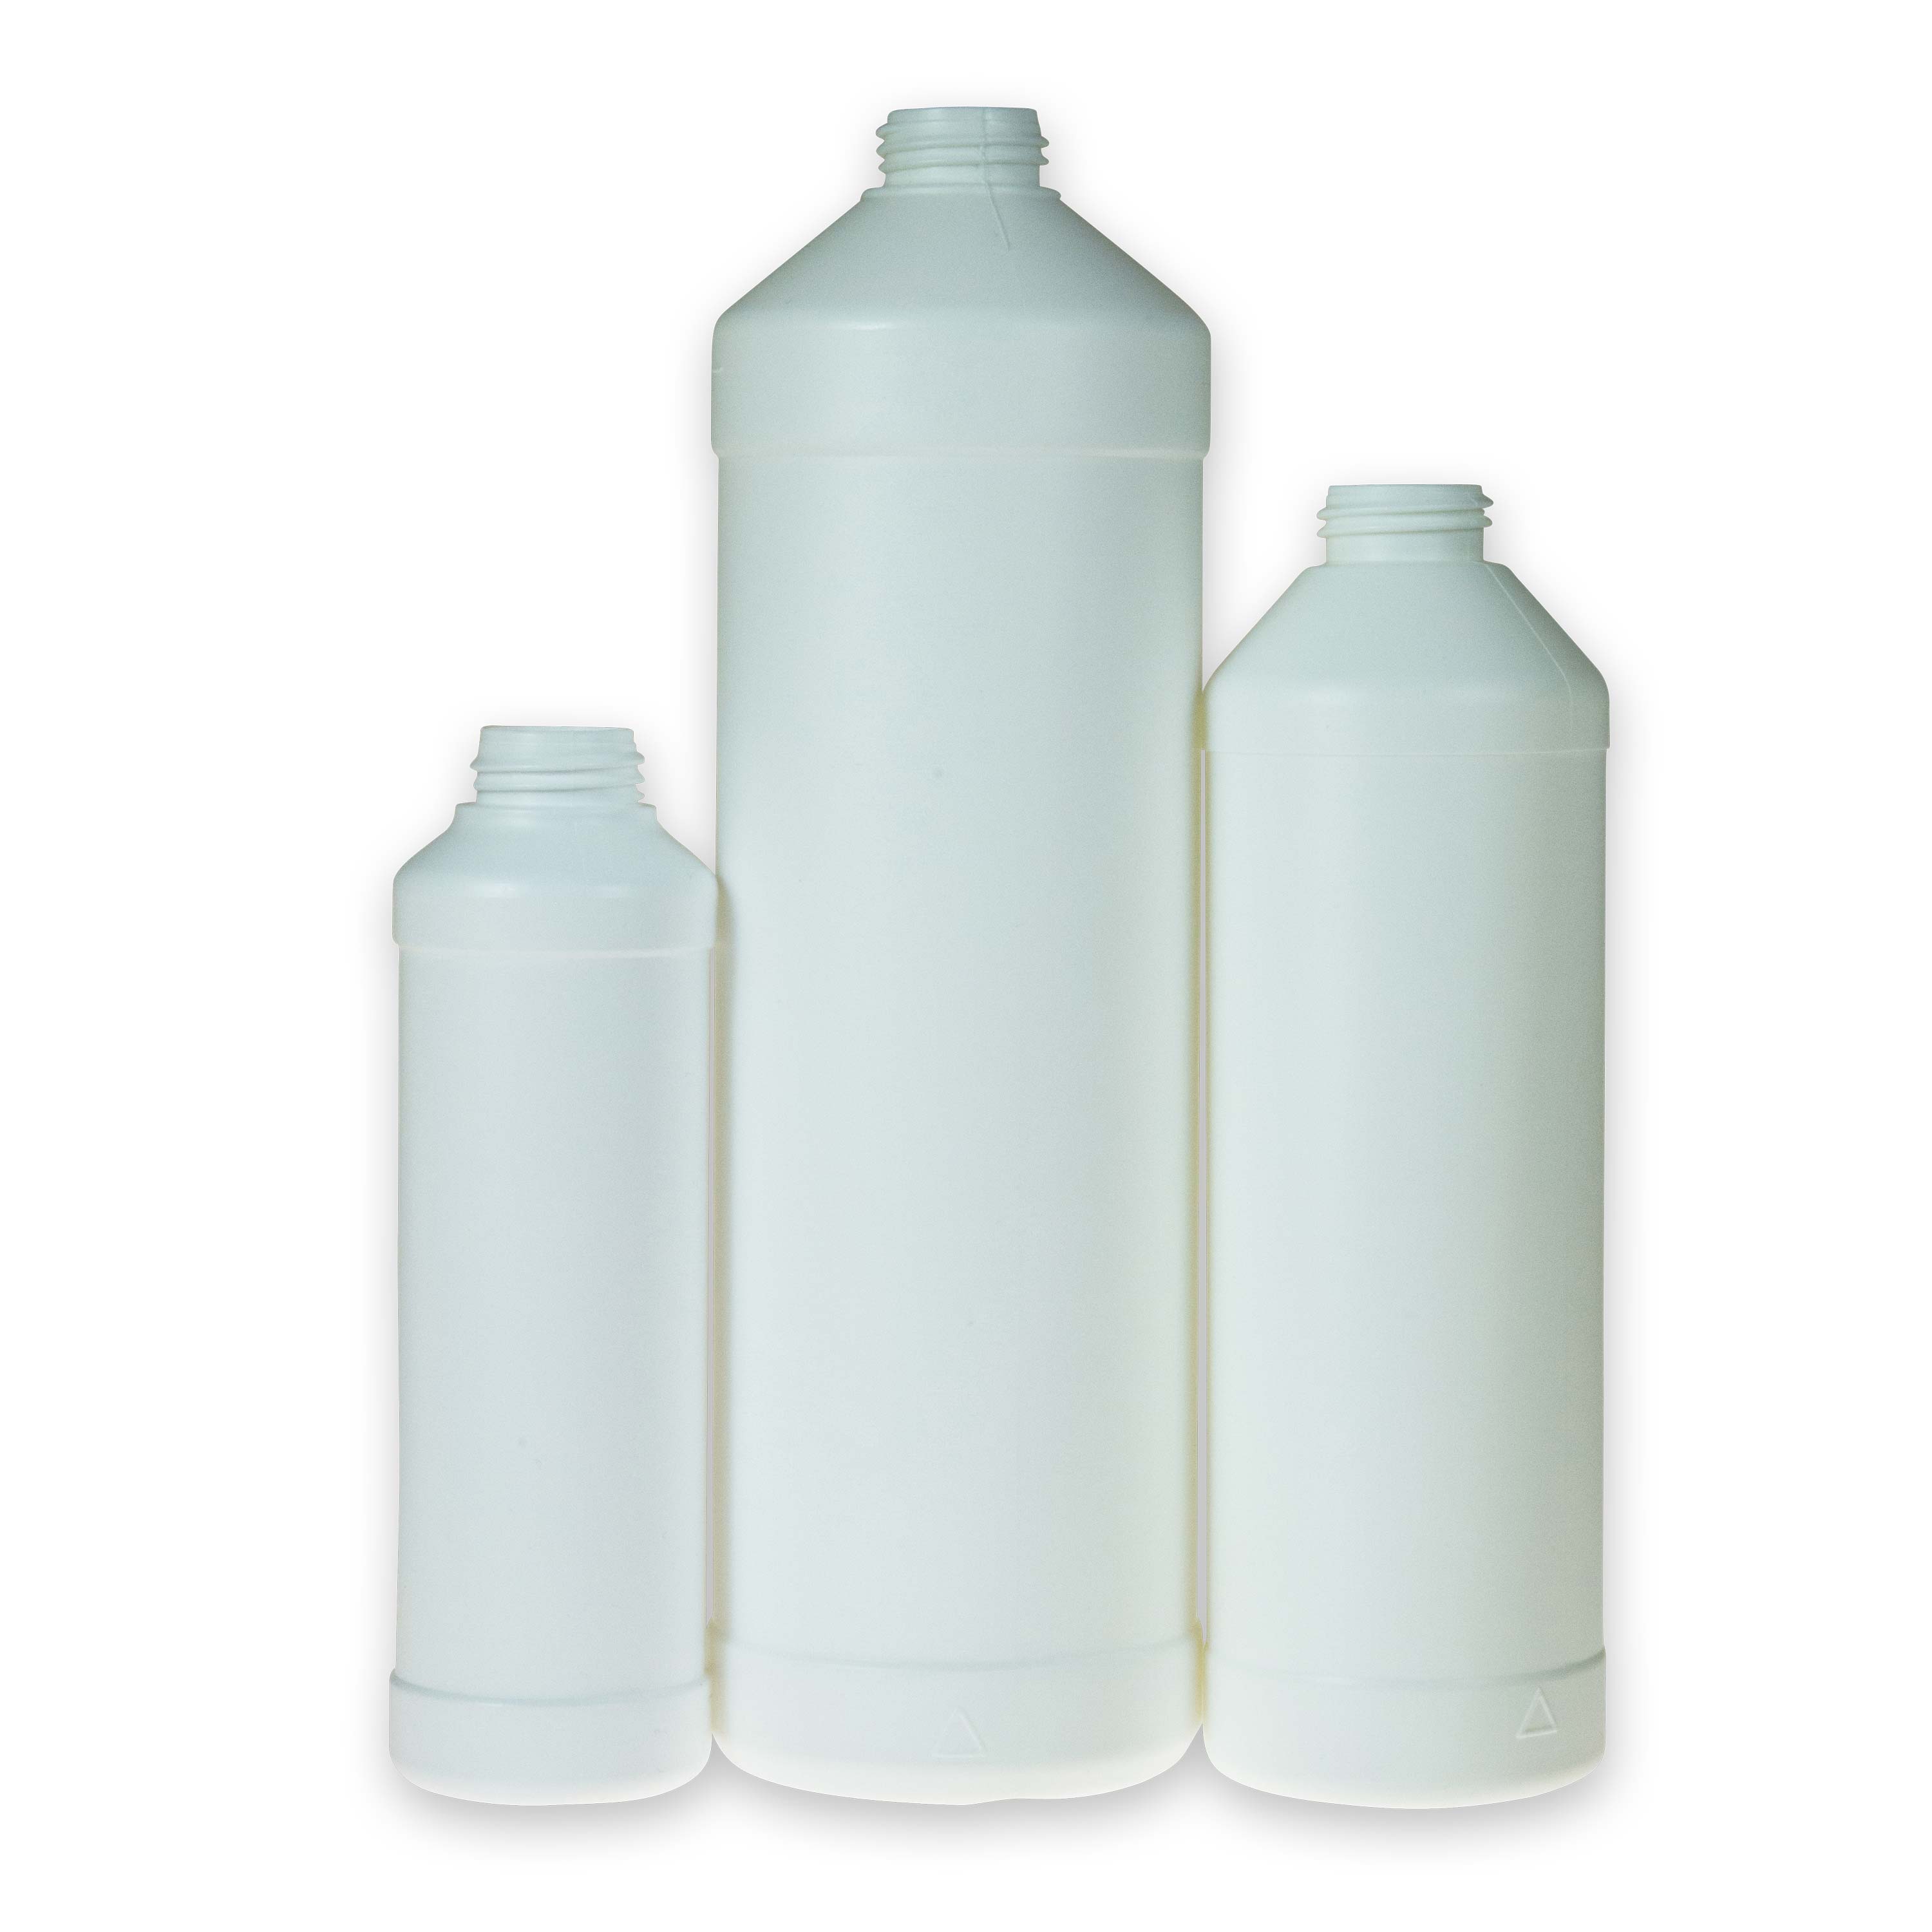 Cylindrical round bottle made of HDPE white